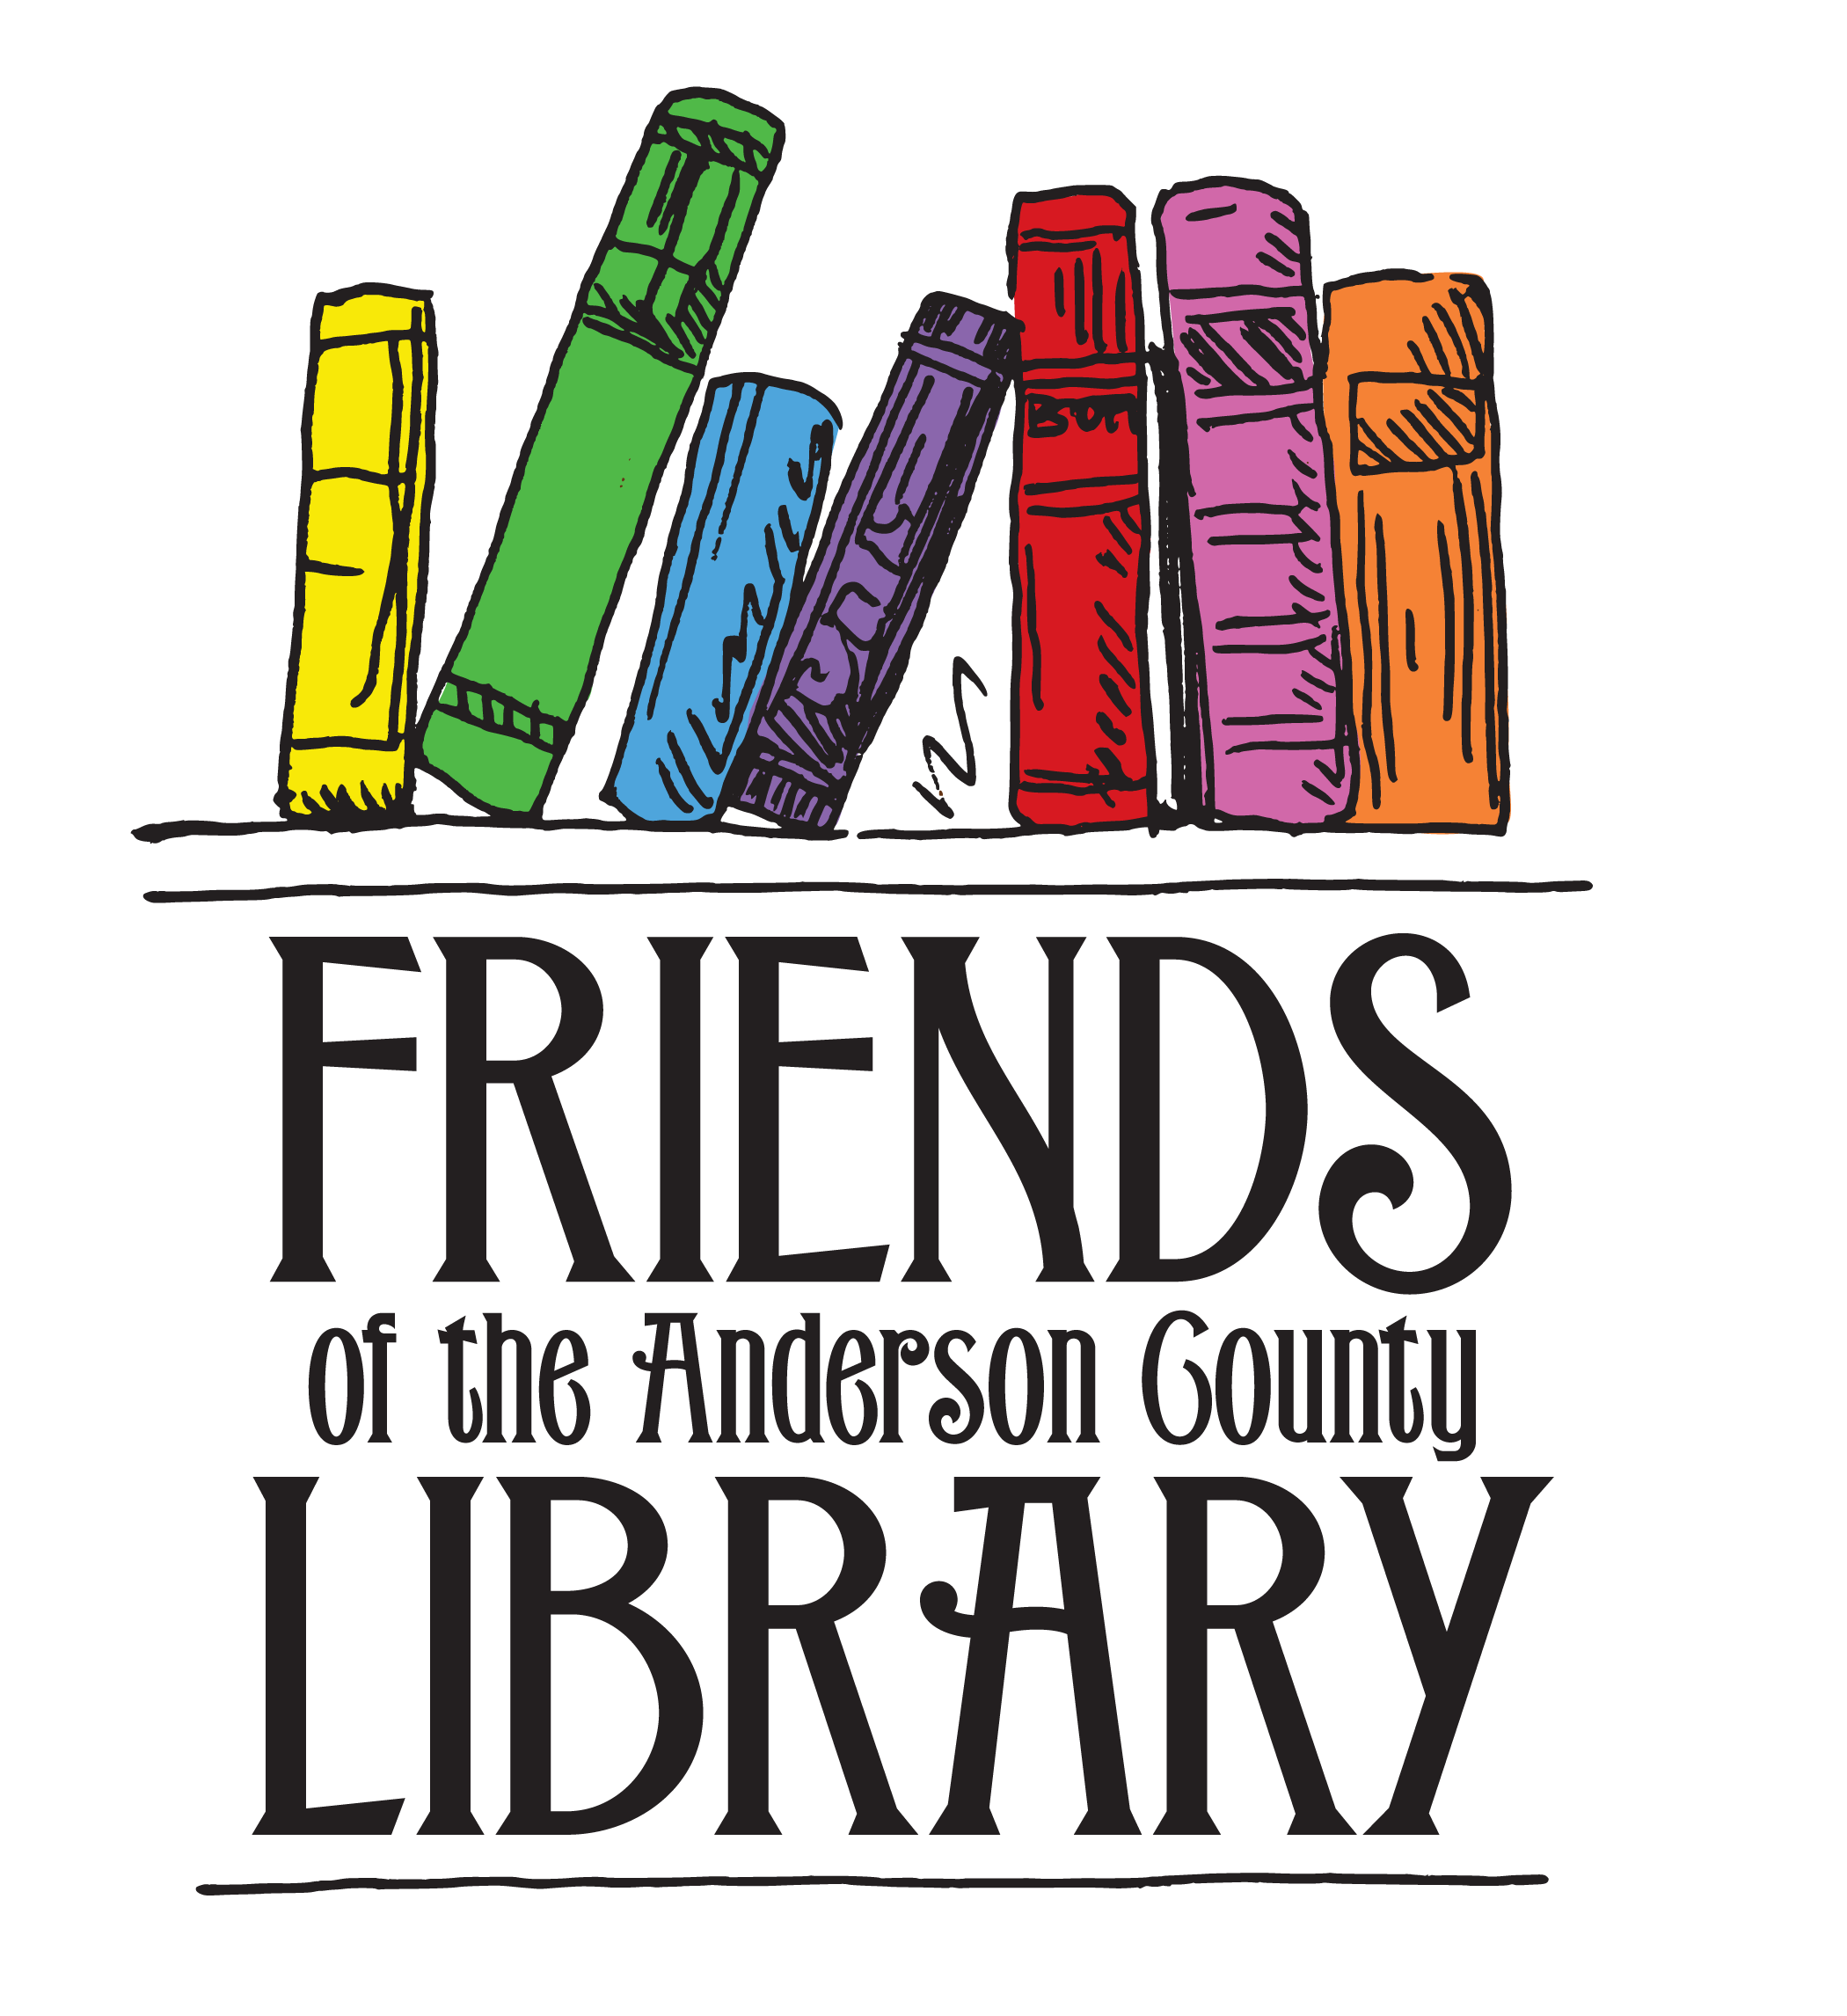 Friends of the Anderson County Library